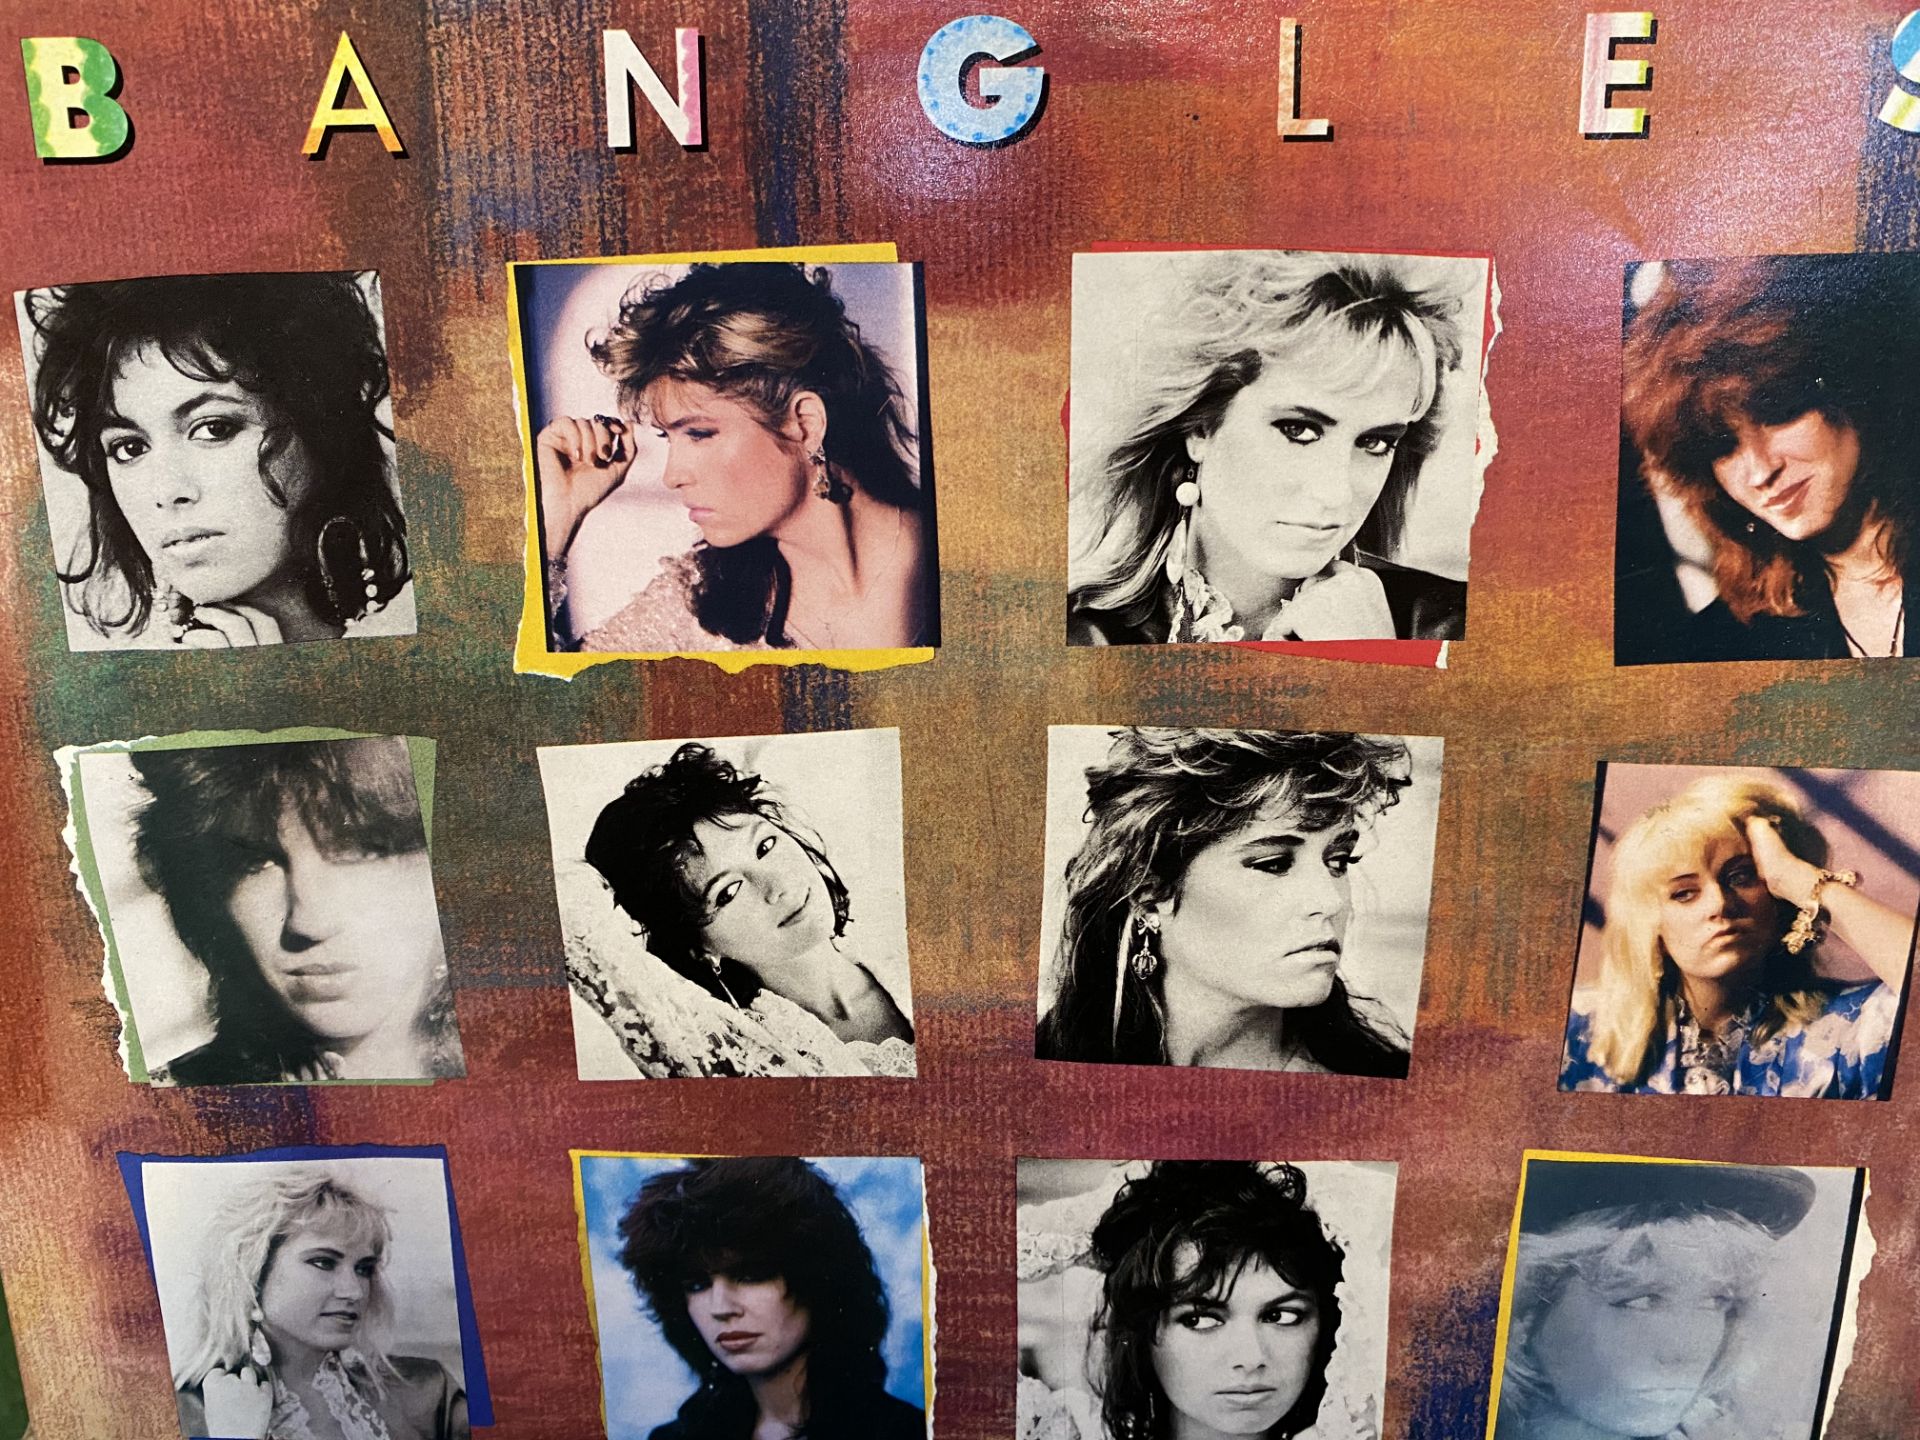 Quantity of LP's to include Now 3, The Bangles, John Lennon - Image 2 of 4